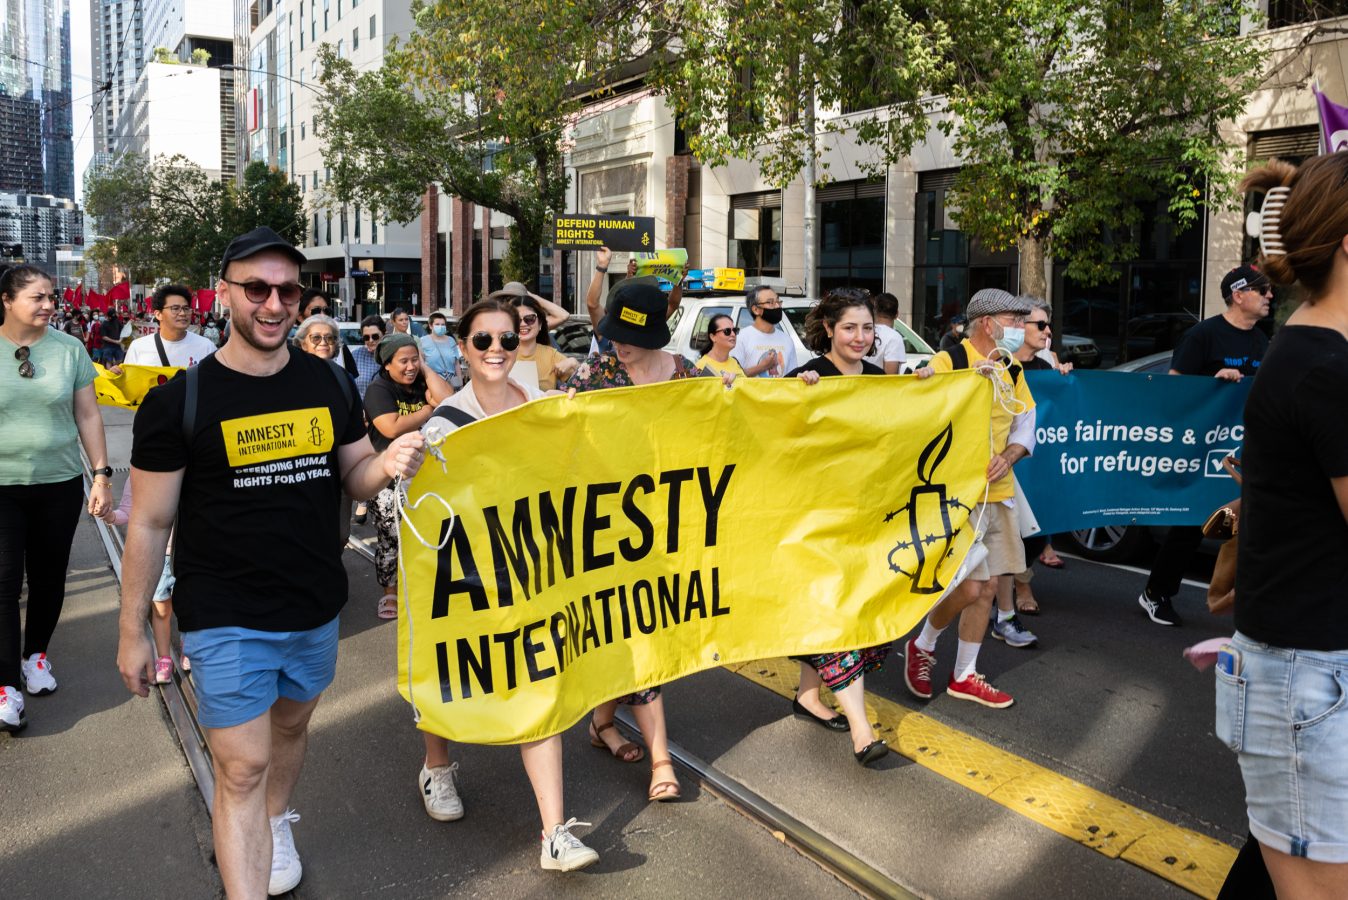 A group of people at a march holding a black and yellow Amnesty International banner between them